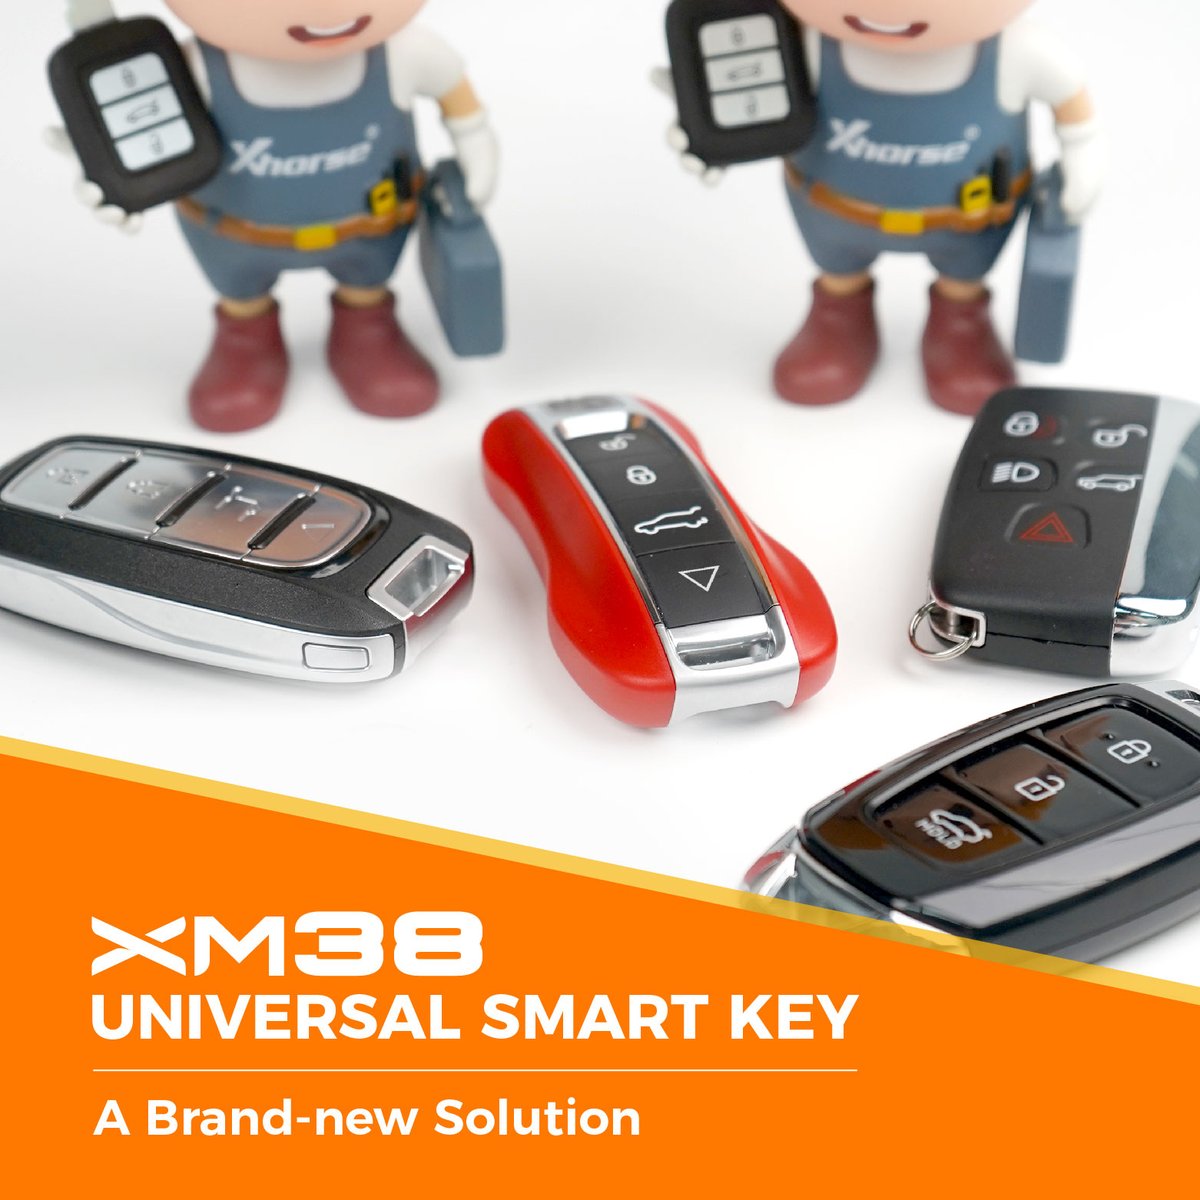 XM38 Universal Smart Key: Newly added 8A, 4D type
It's more powerful and comes in a variety of looks to suit your needs!

#xhorse  #remote #locksmithlife #locksmithing #carlocksmith #automotivesecurity #autolocksmith #technology #locksmithtools